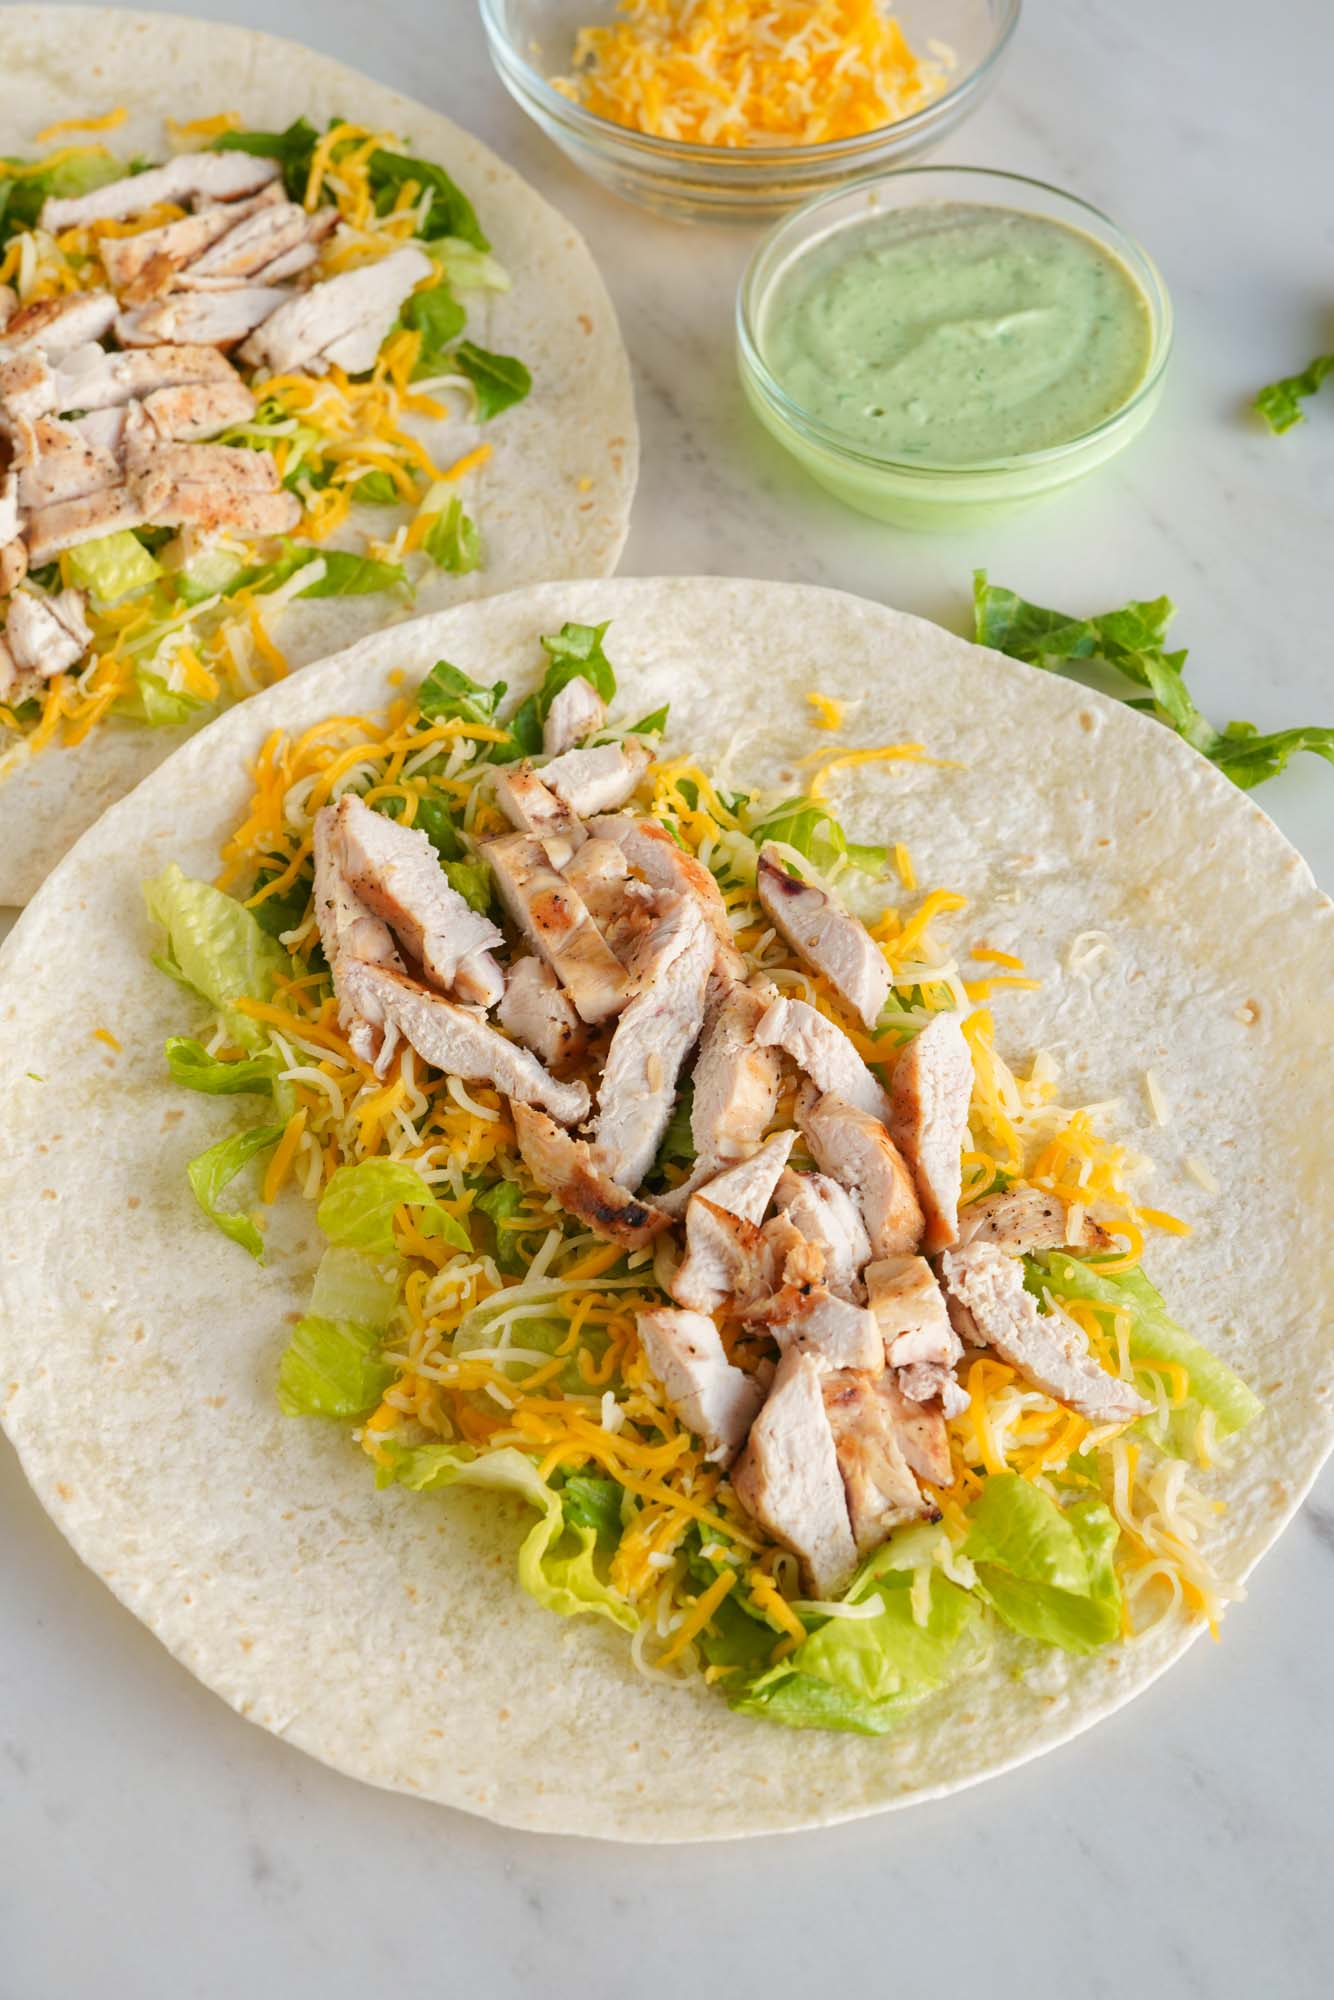 Two wraps filled with lettuce, cheese, and grilled chicken.